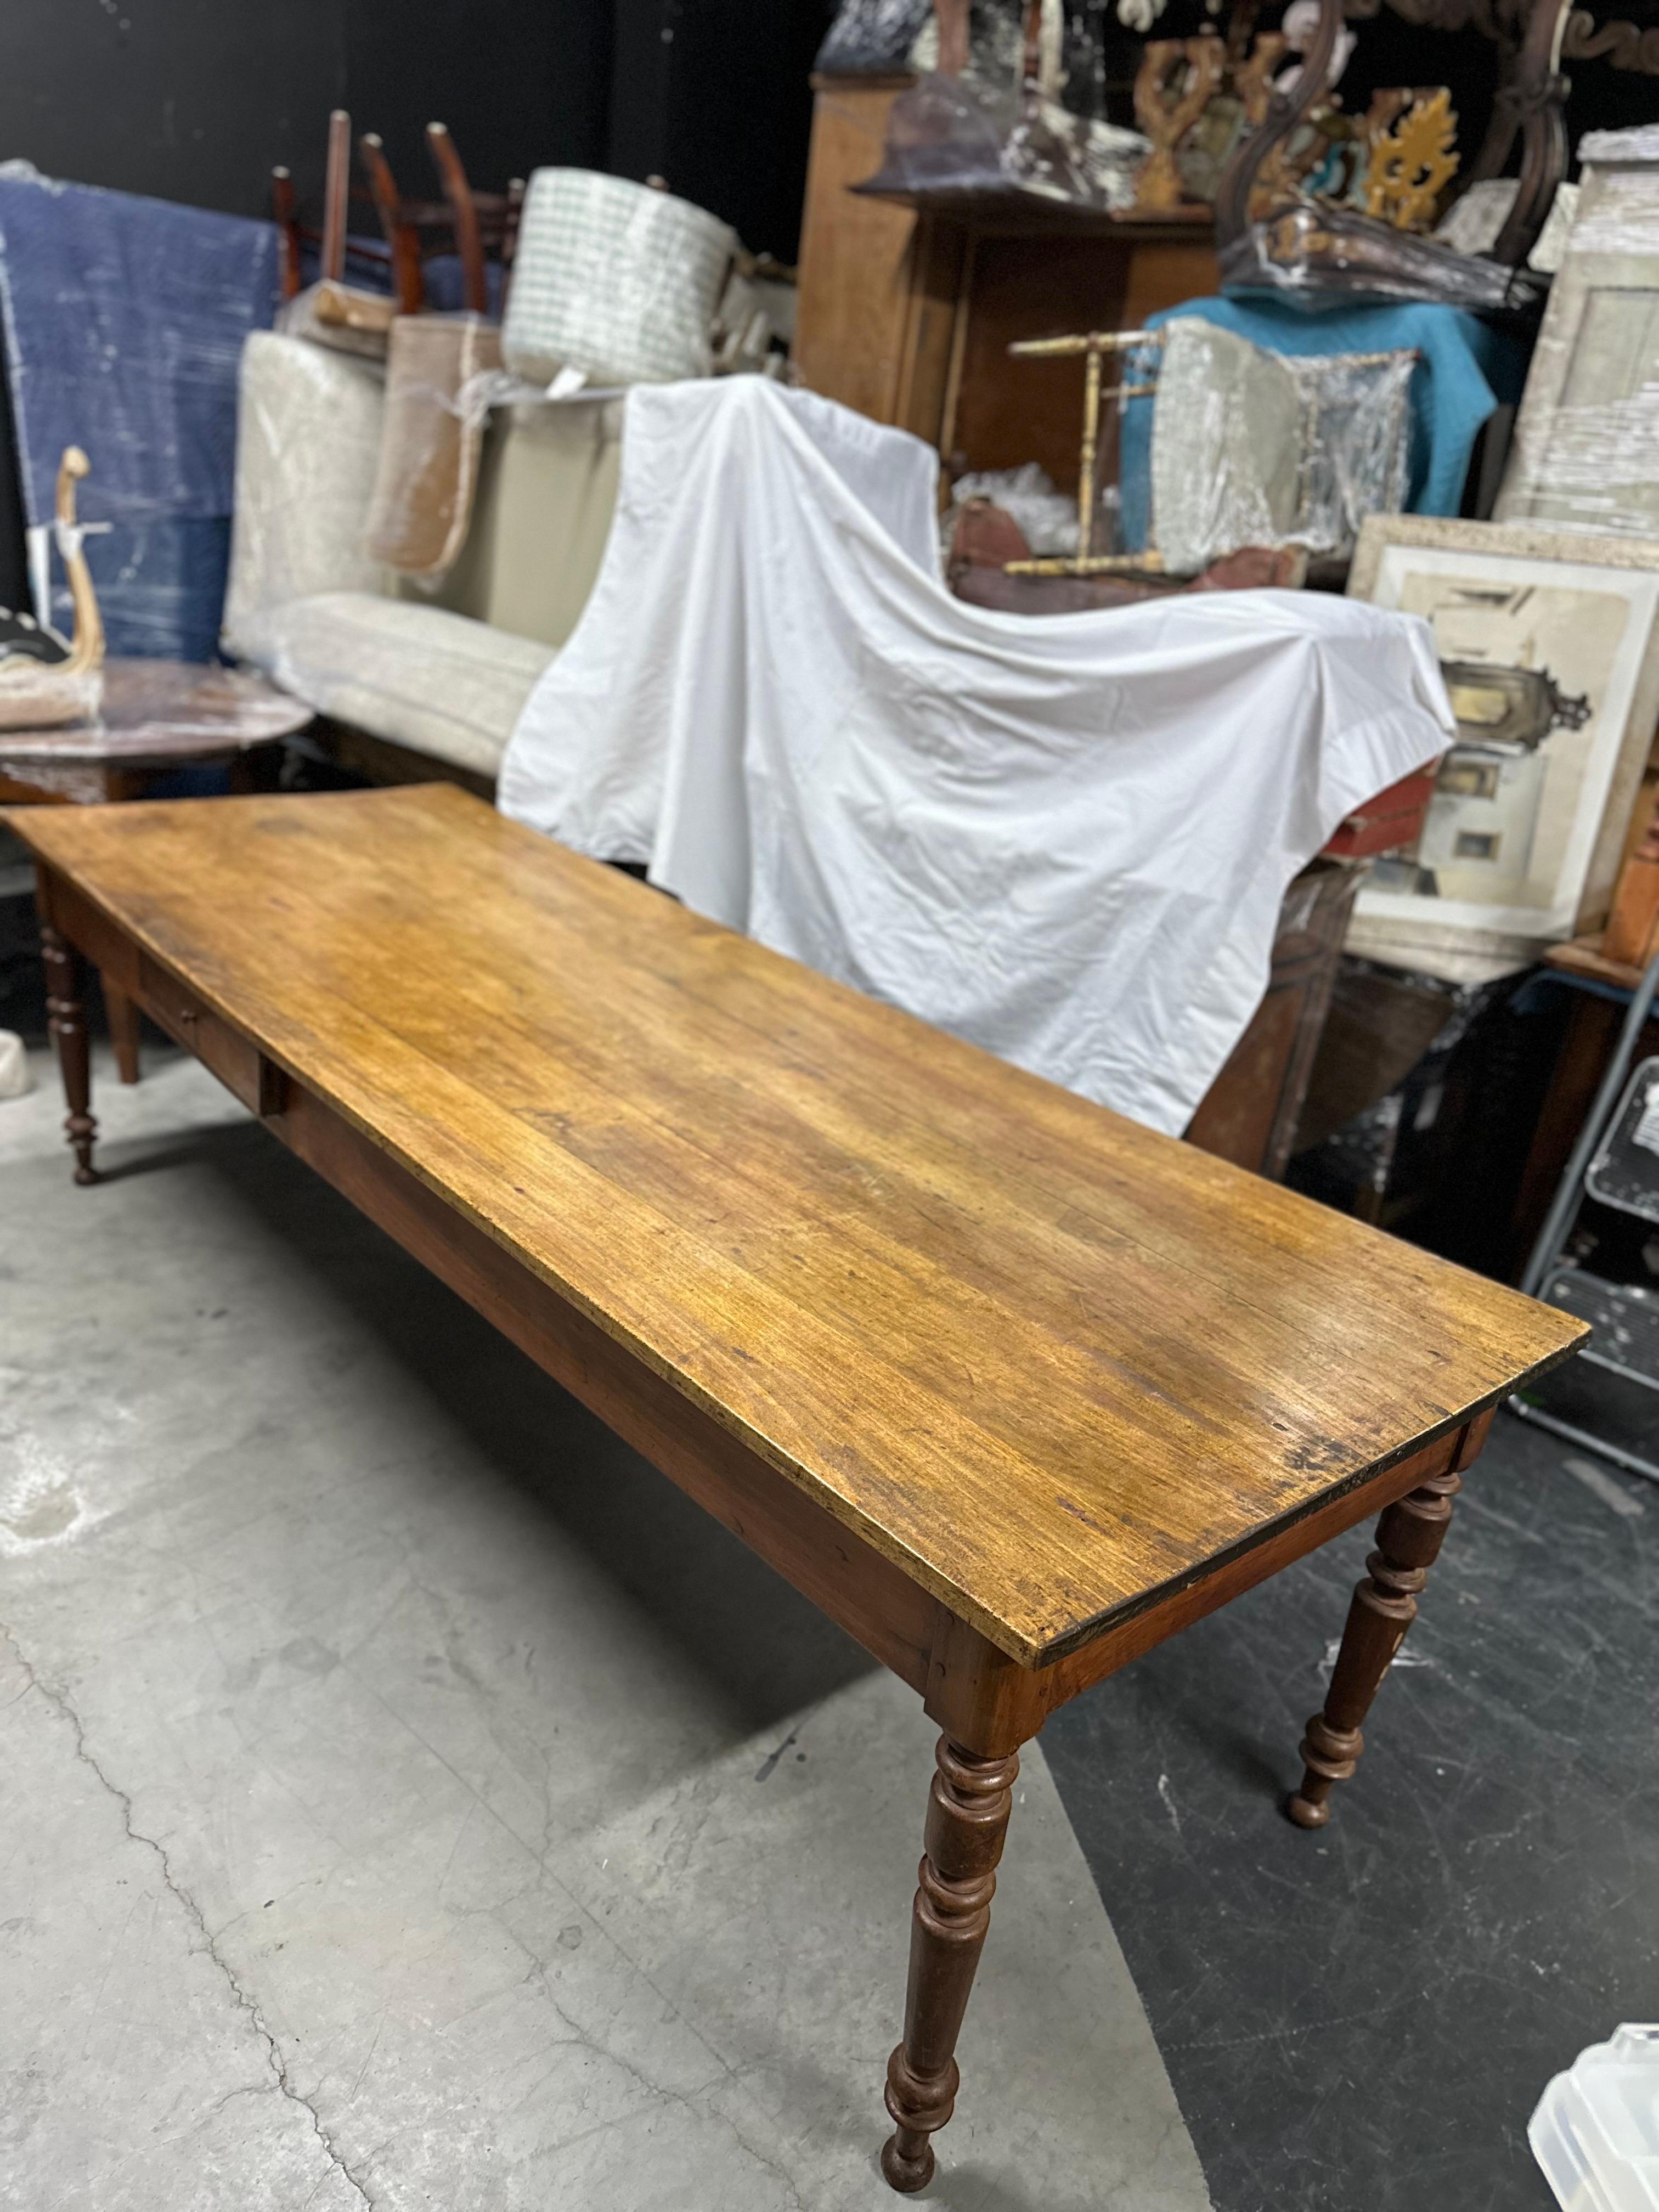 This Antique French Country Farm Dining Table exudes rustic charm and timeless appeal. Crafted with meticulous attention to detail, it features a plank top that showcases the natural beauty of the wood grain. The turned legs add a touch of elegance